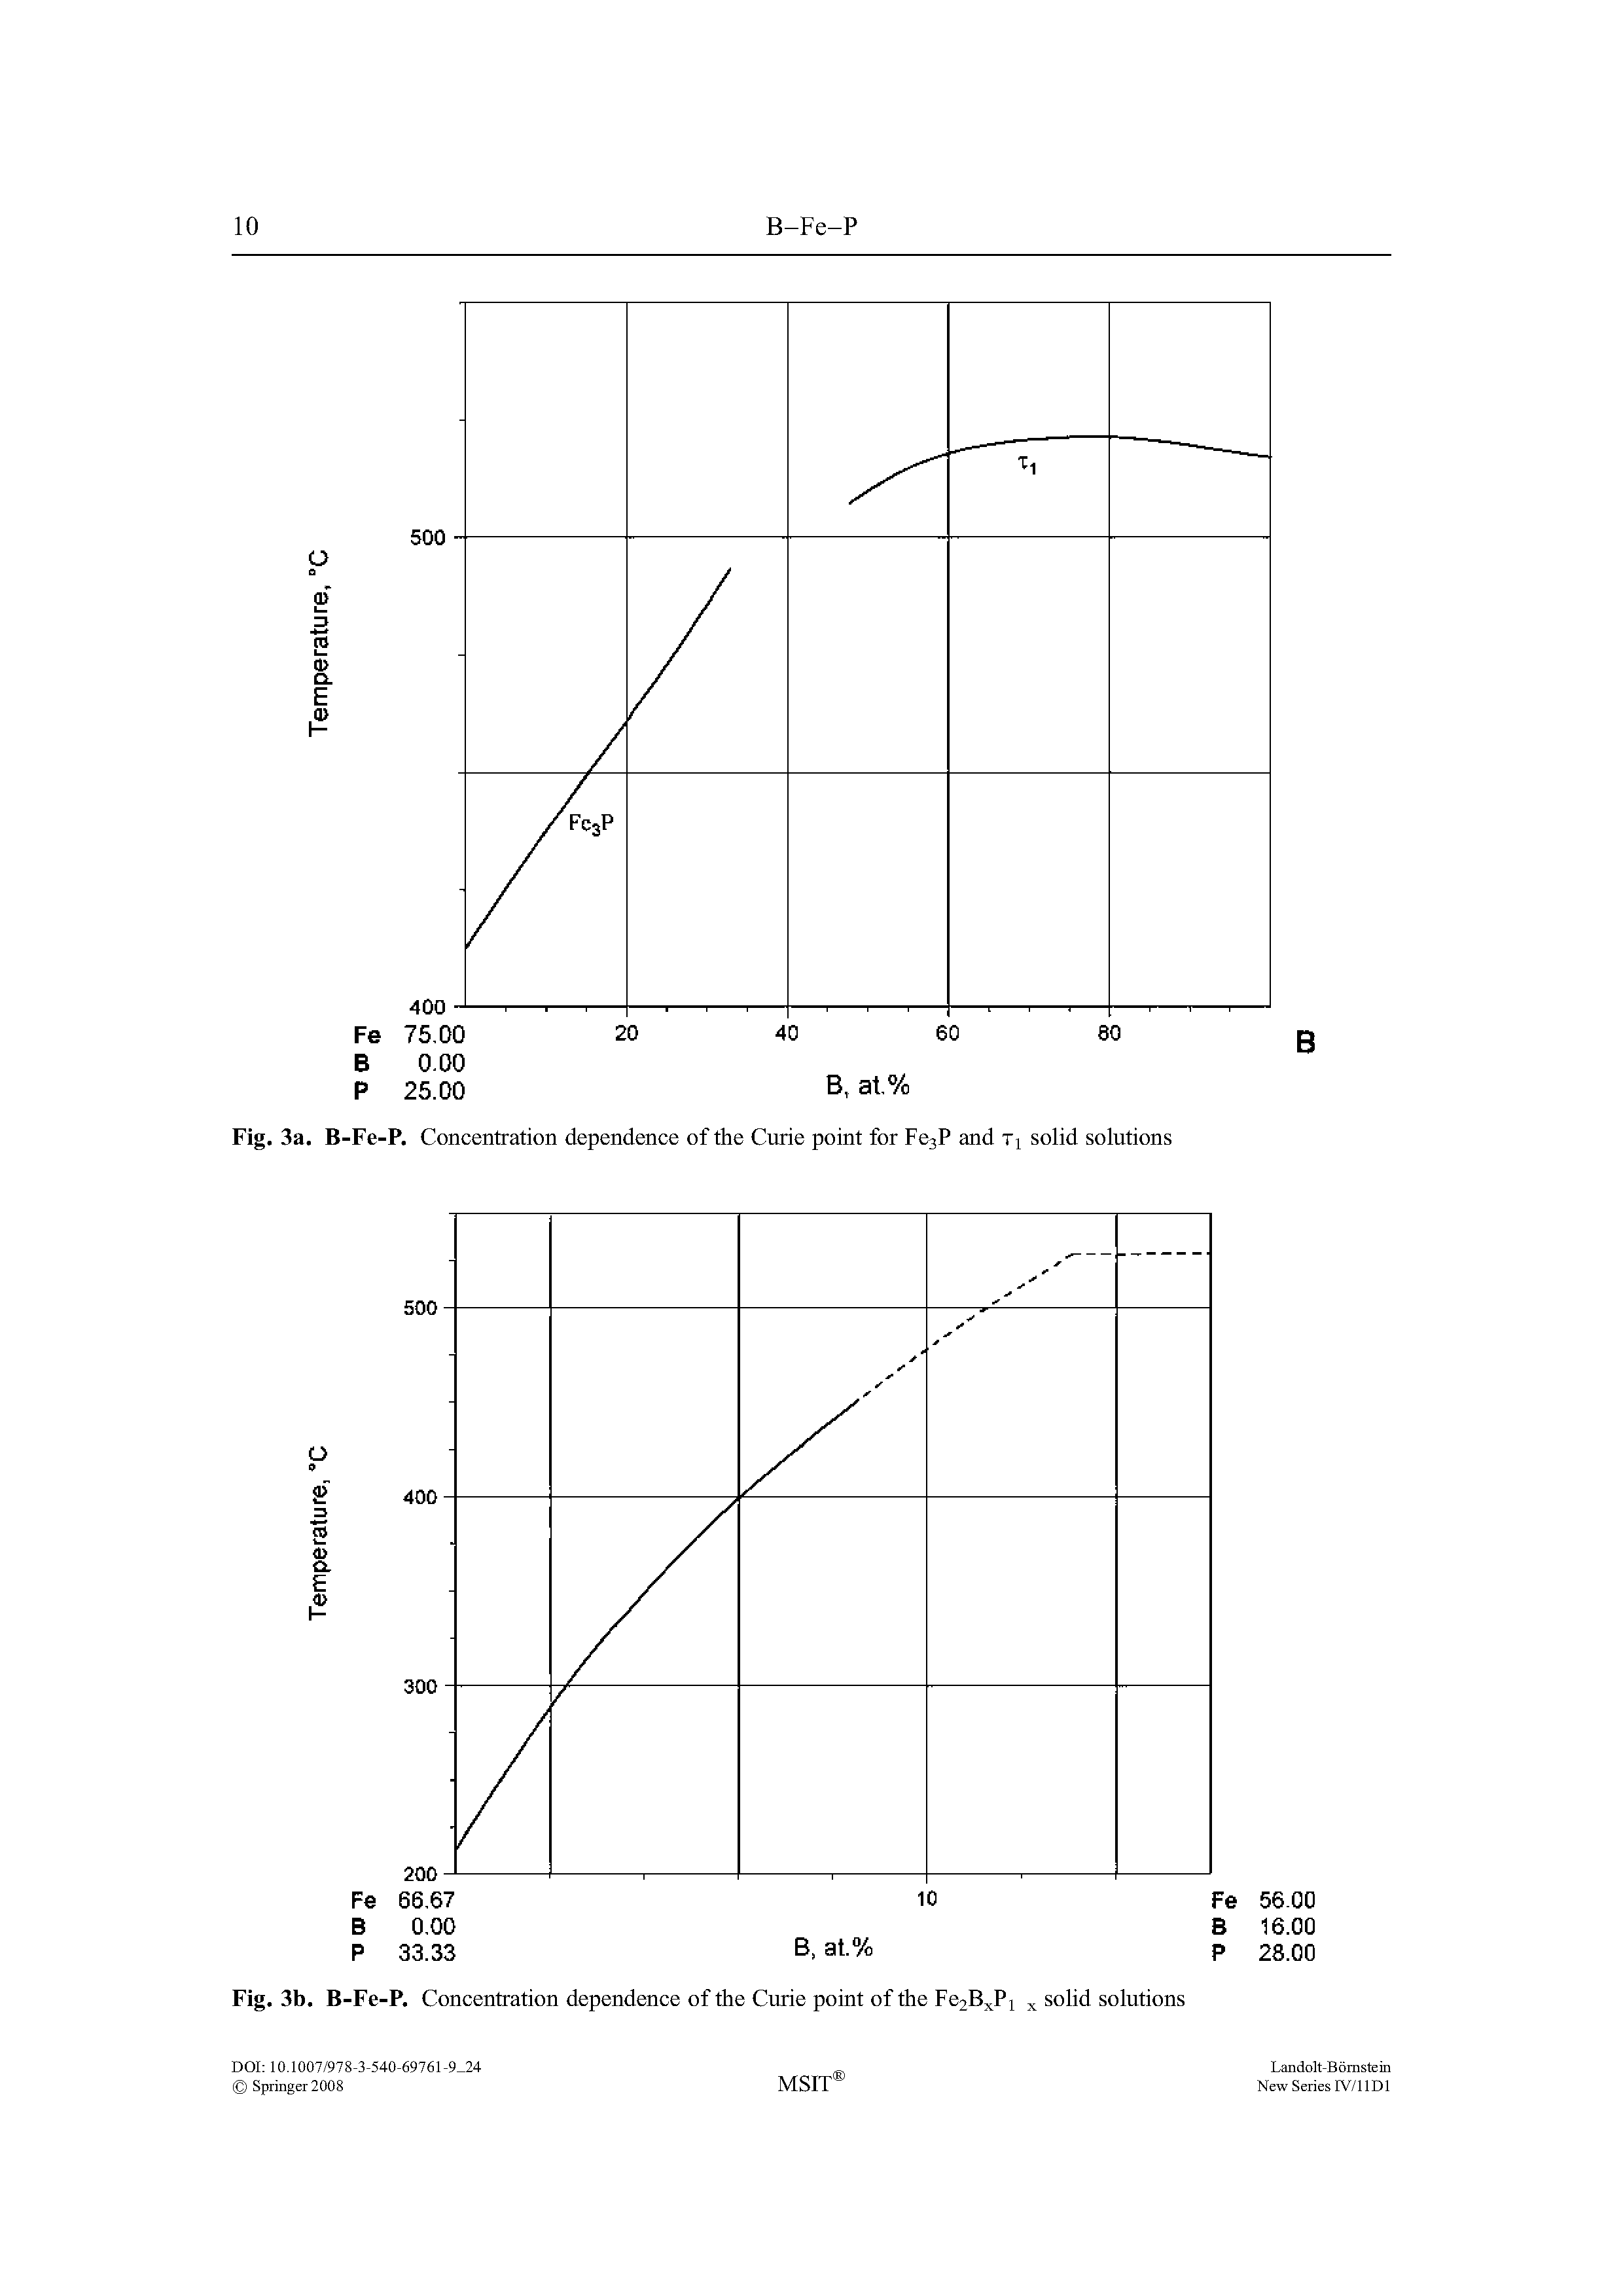 Fig. 3a. B-Fe-P. Concentration dependence of the Curie point for Fe3P and Xi solid solutions...